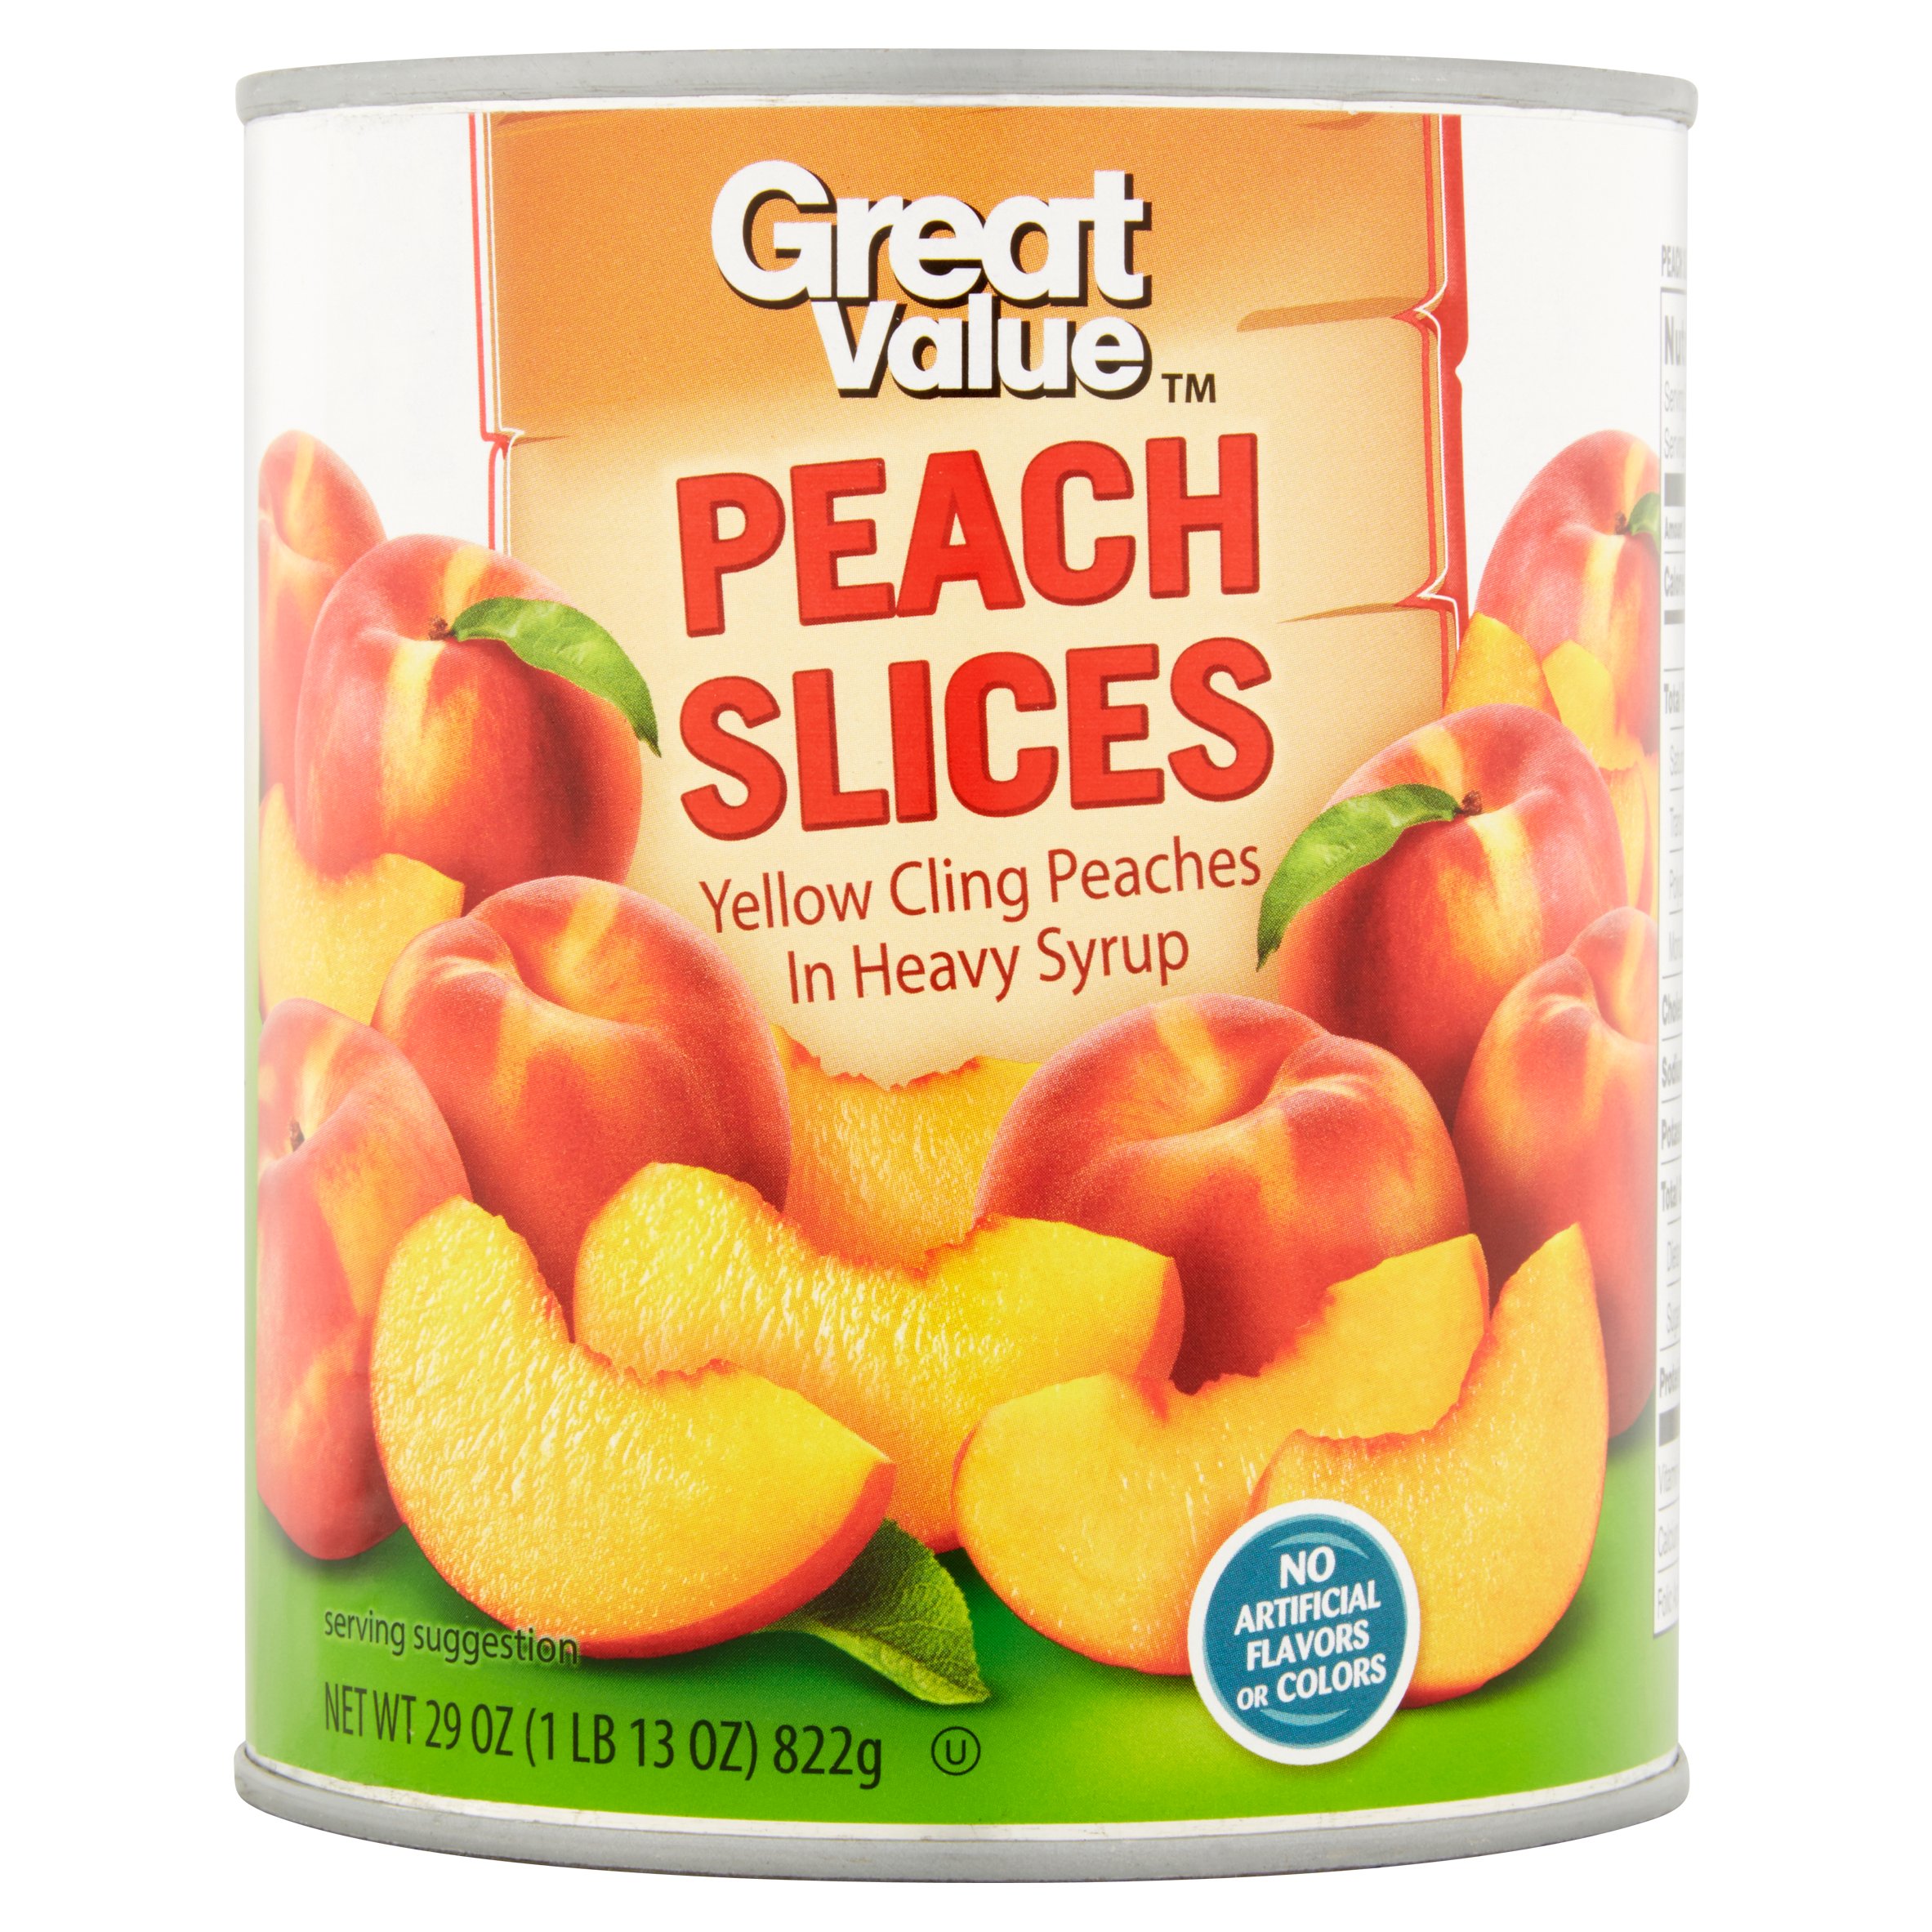 Great Value Peach Slices in Heavy Syrup, 29 Oz, 3 Pack Image